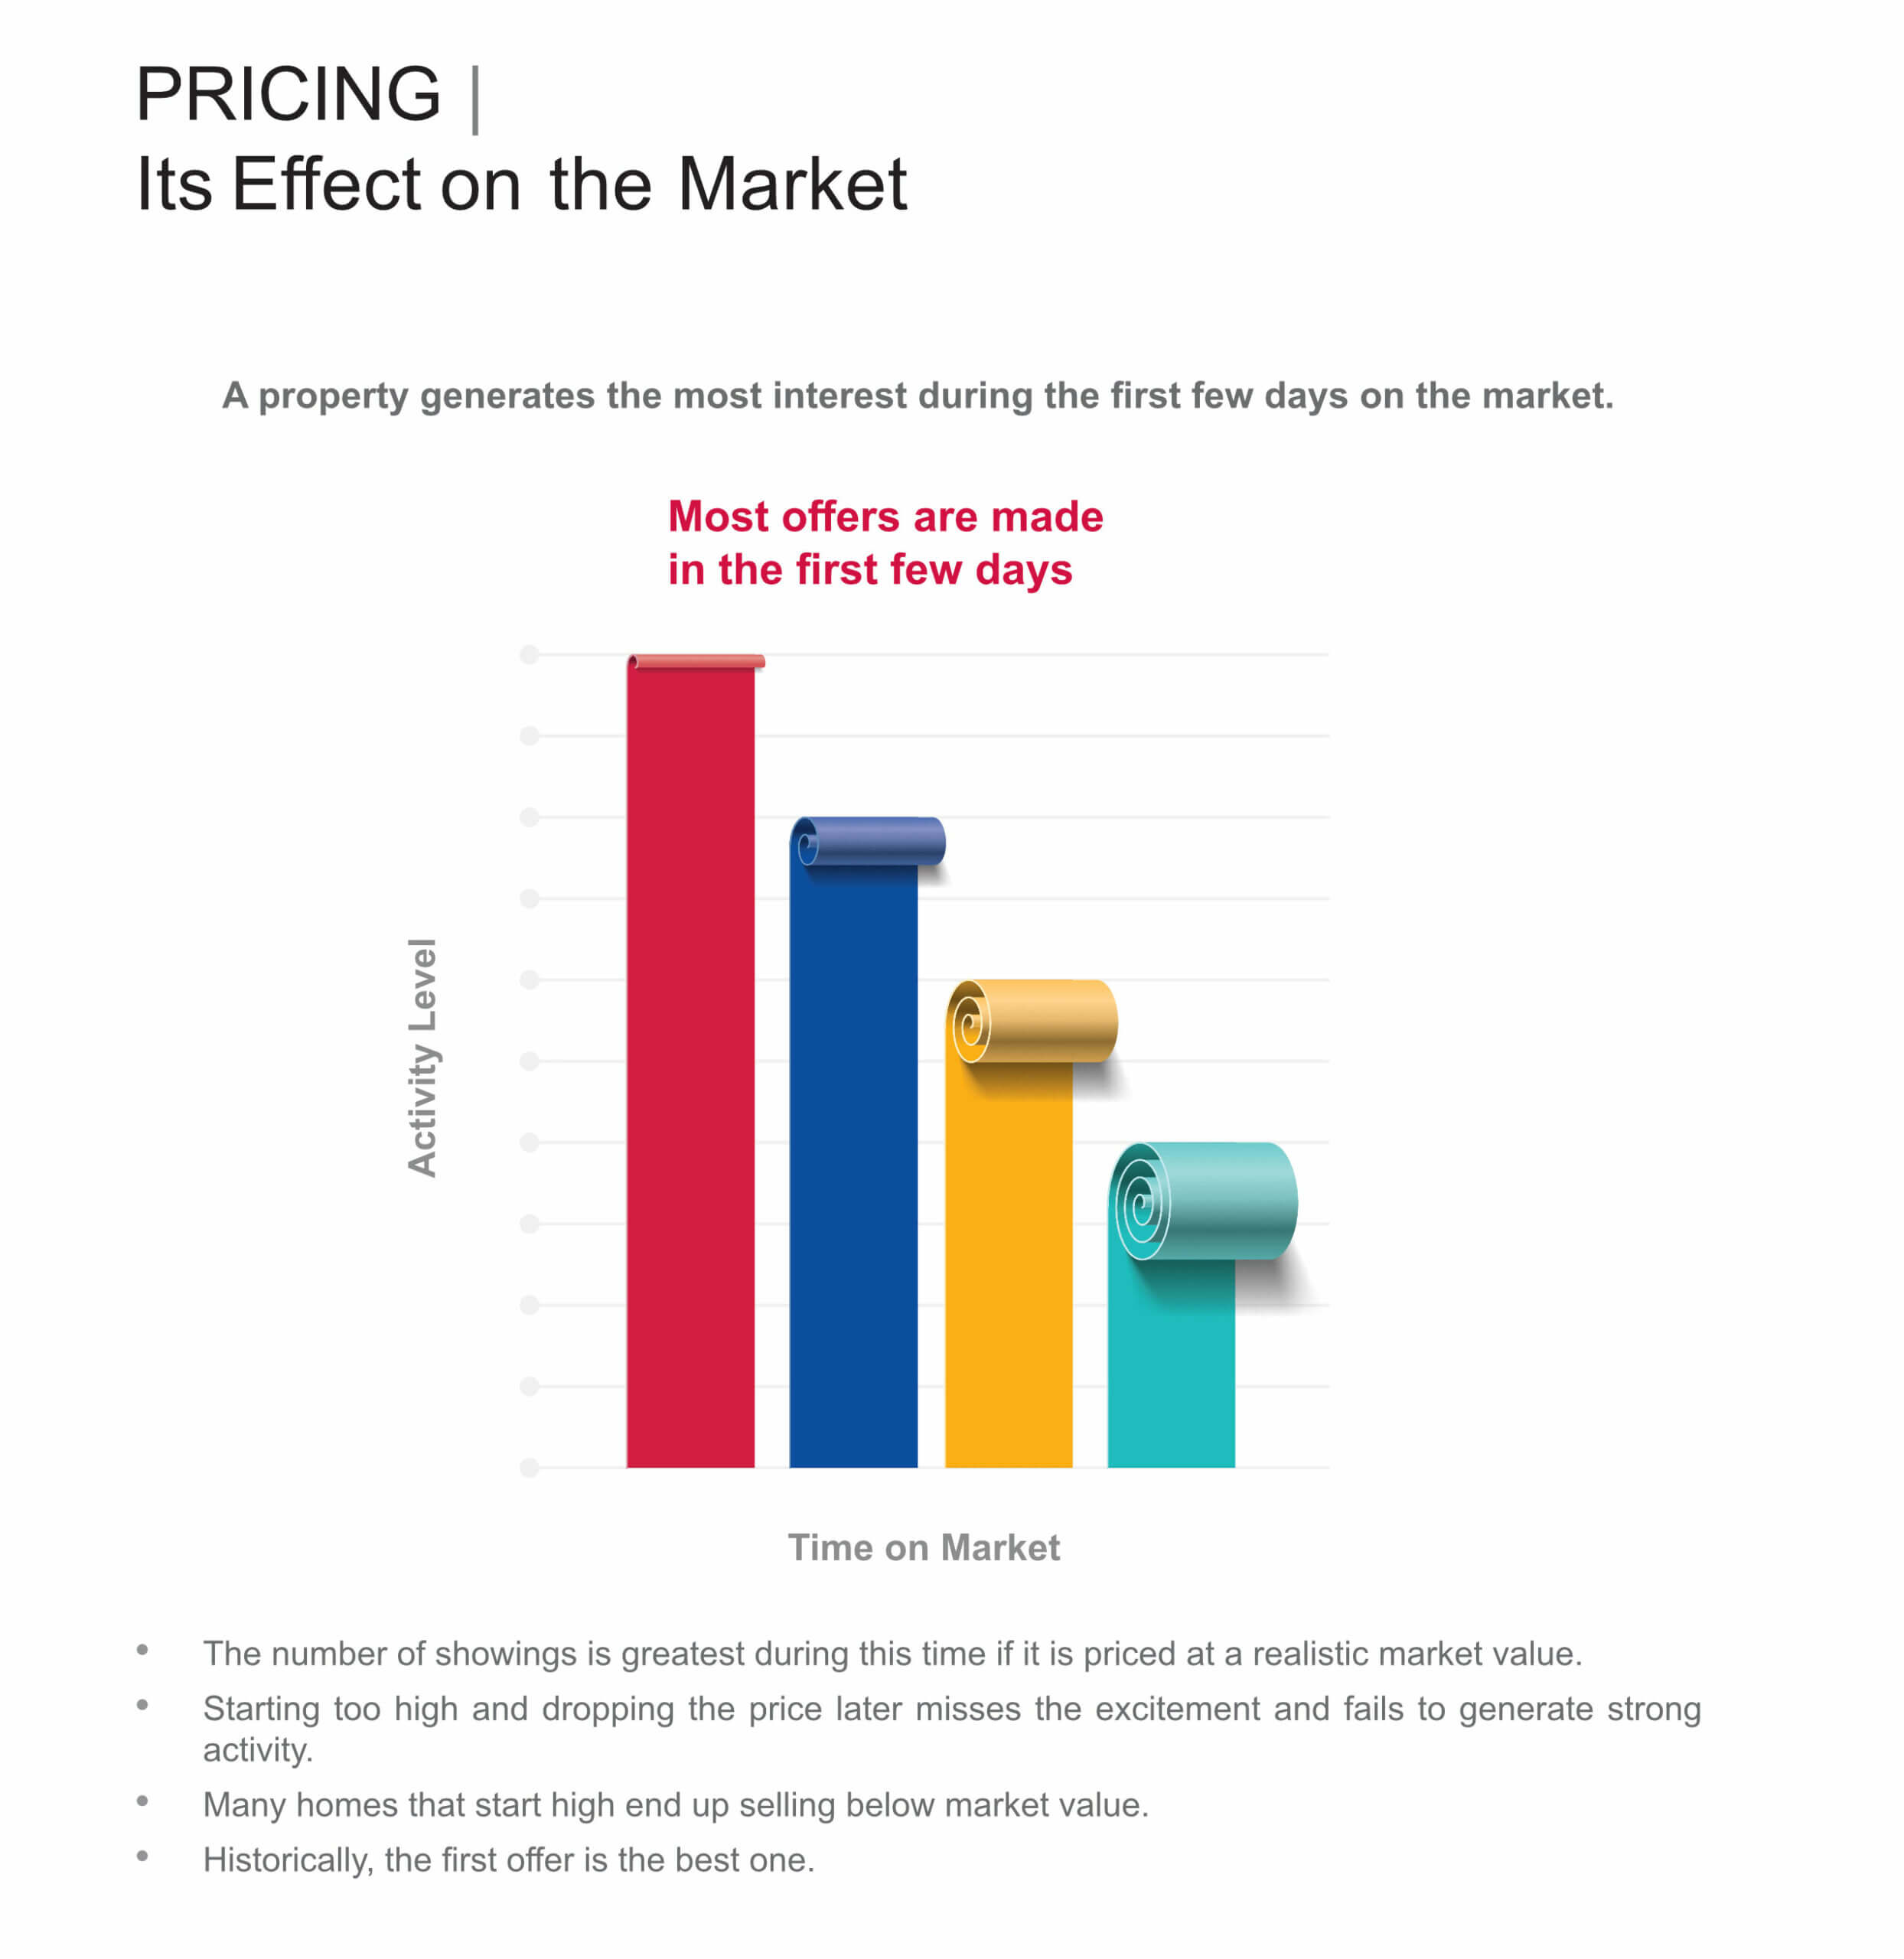 Pricing4-Its-Effect-on-the-Market